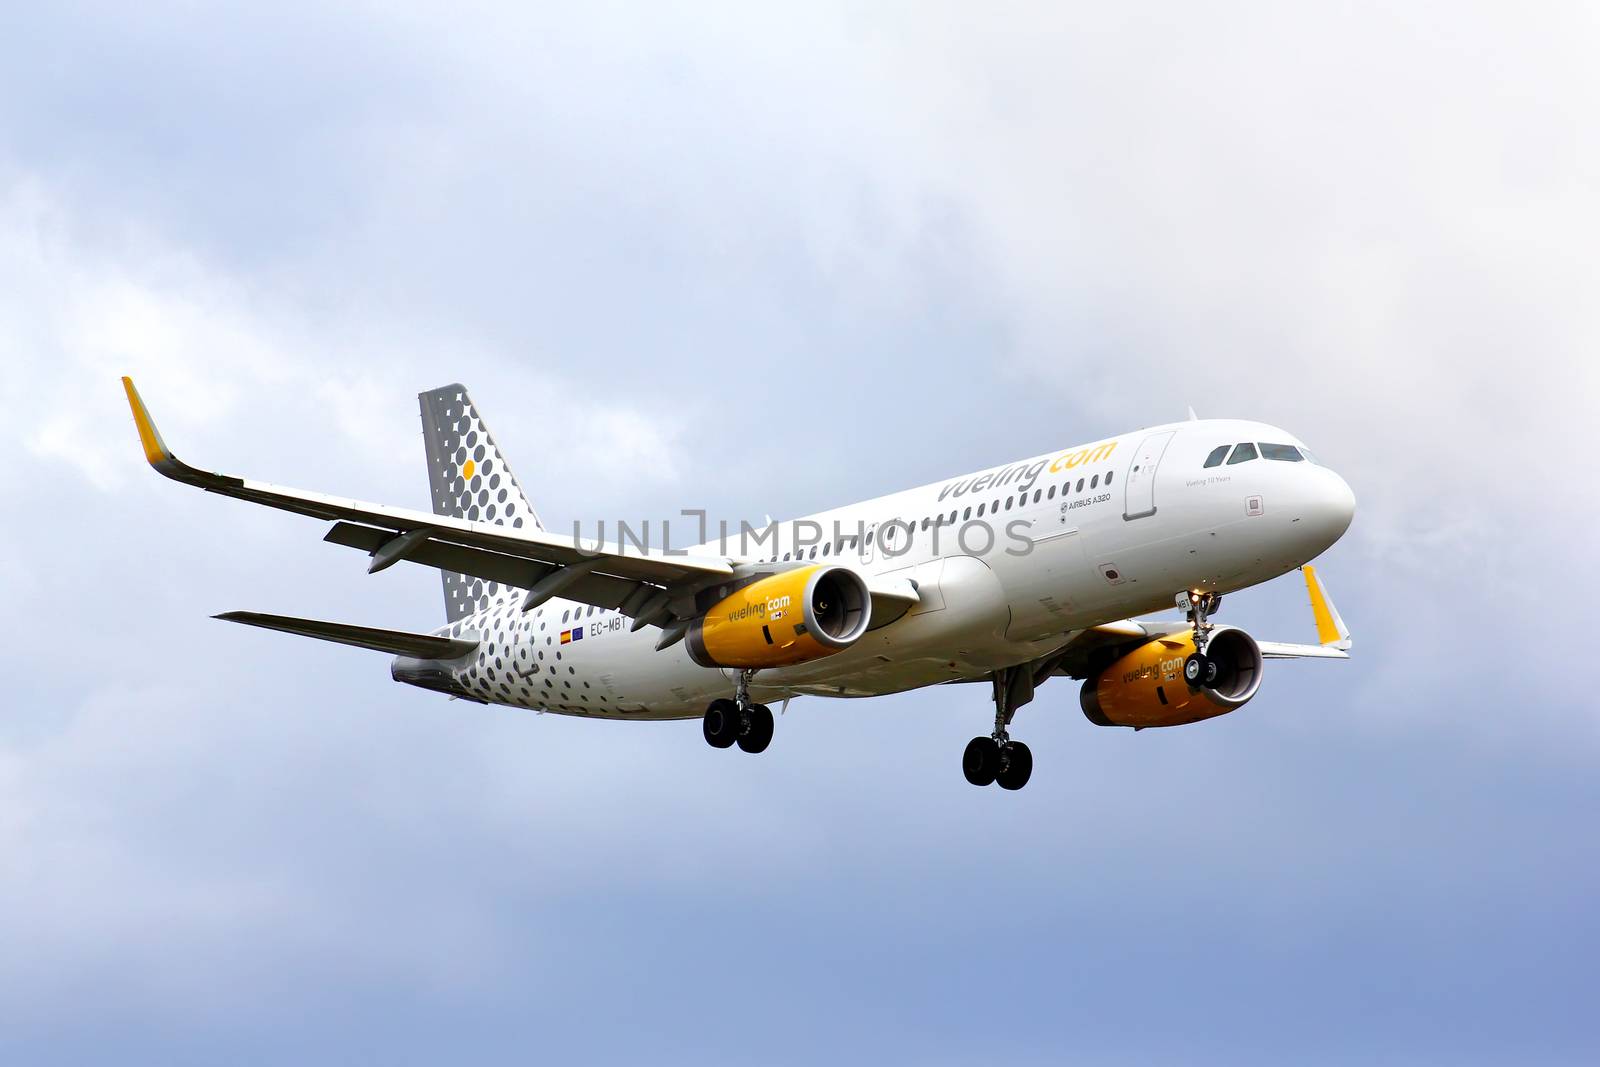 BERLIN, GERMANY - AUGUST 17, 2014: Vueling Airlines Airbus A320 arrives to the Tegel International Airport.